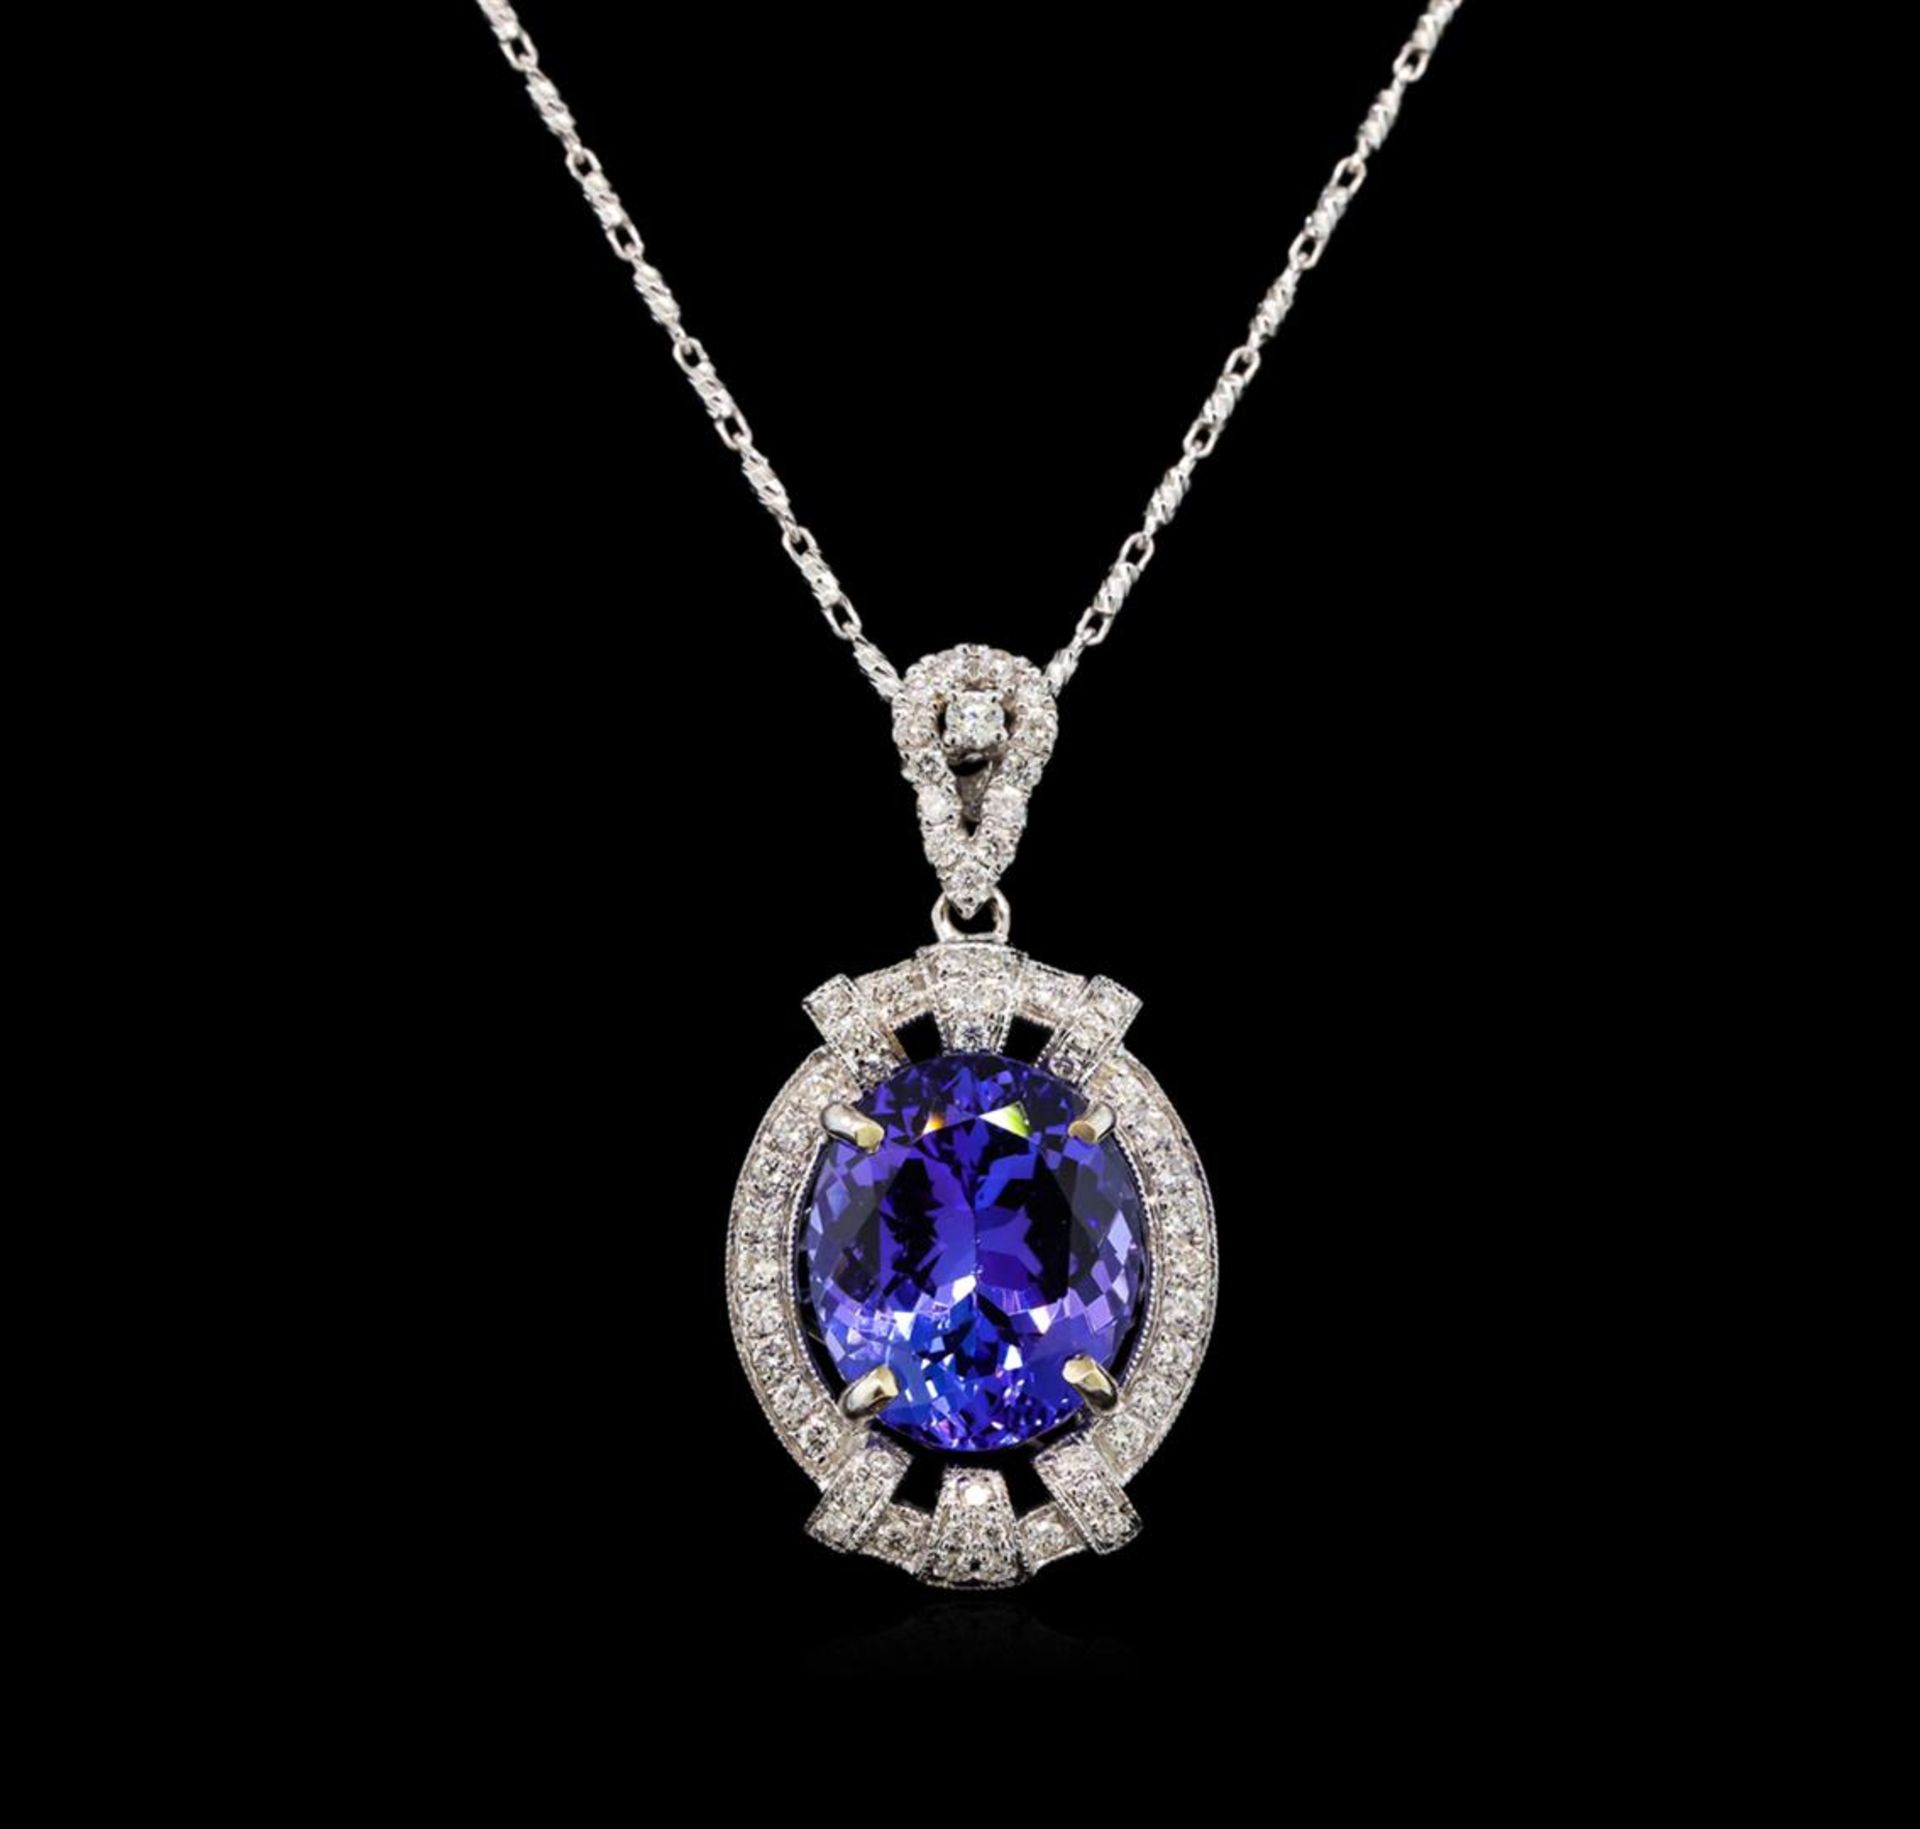 18KT White Gold 6.20 ctw Tanzanite and Diamond Pendant With Chain - Image 2 of 8